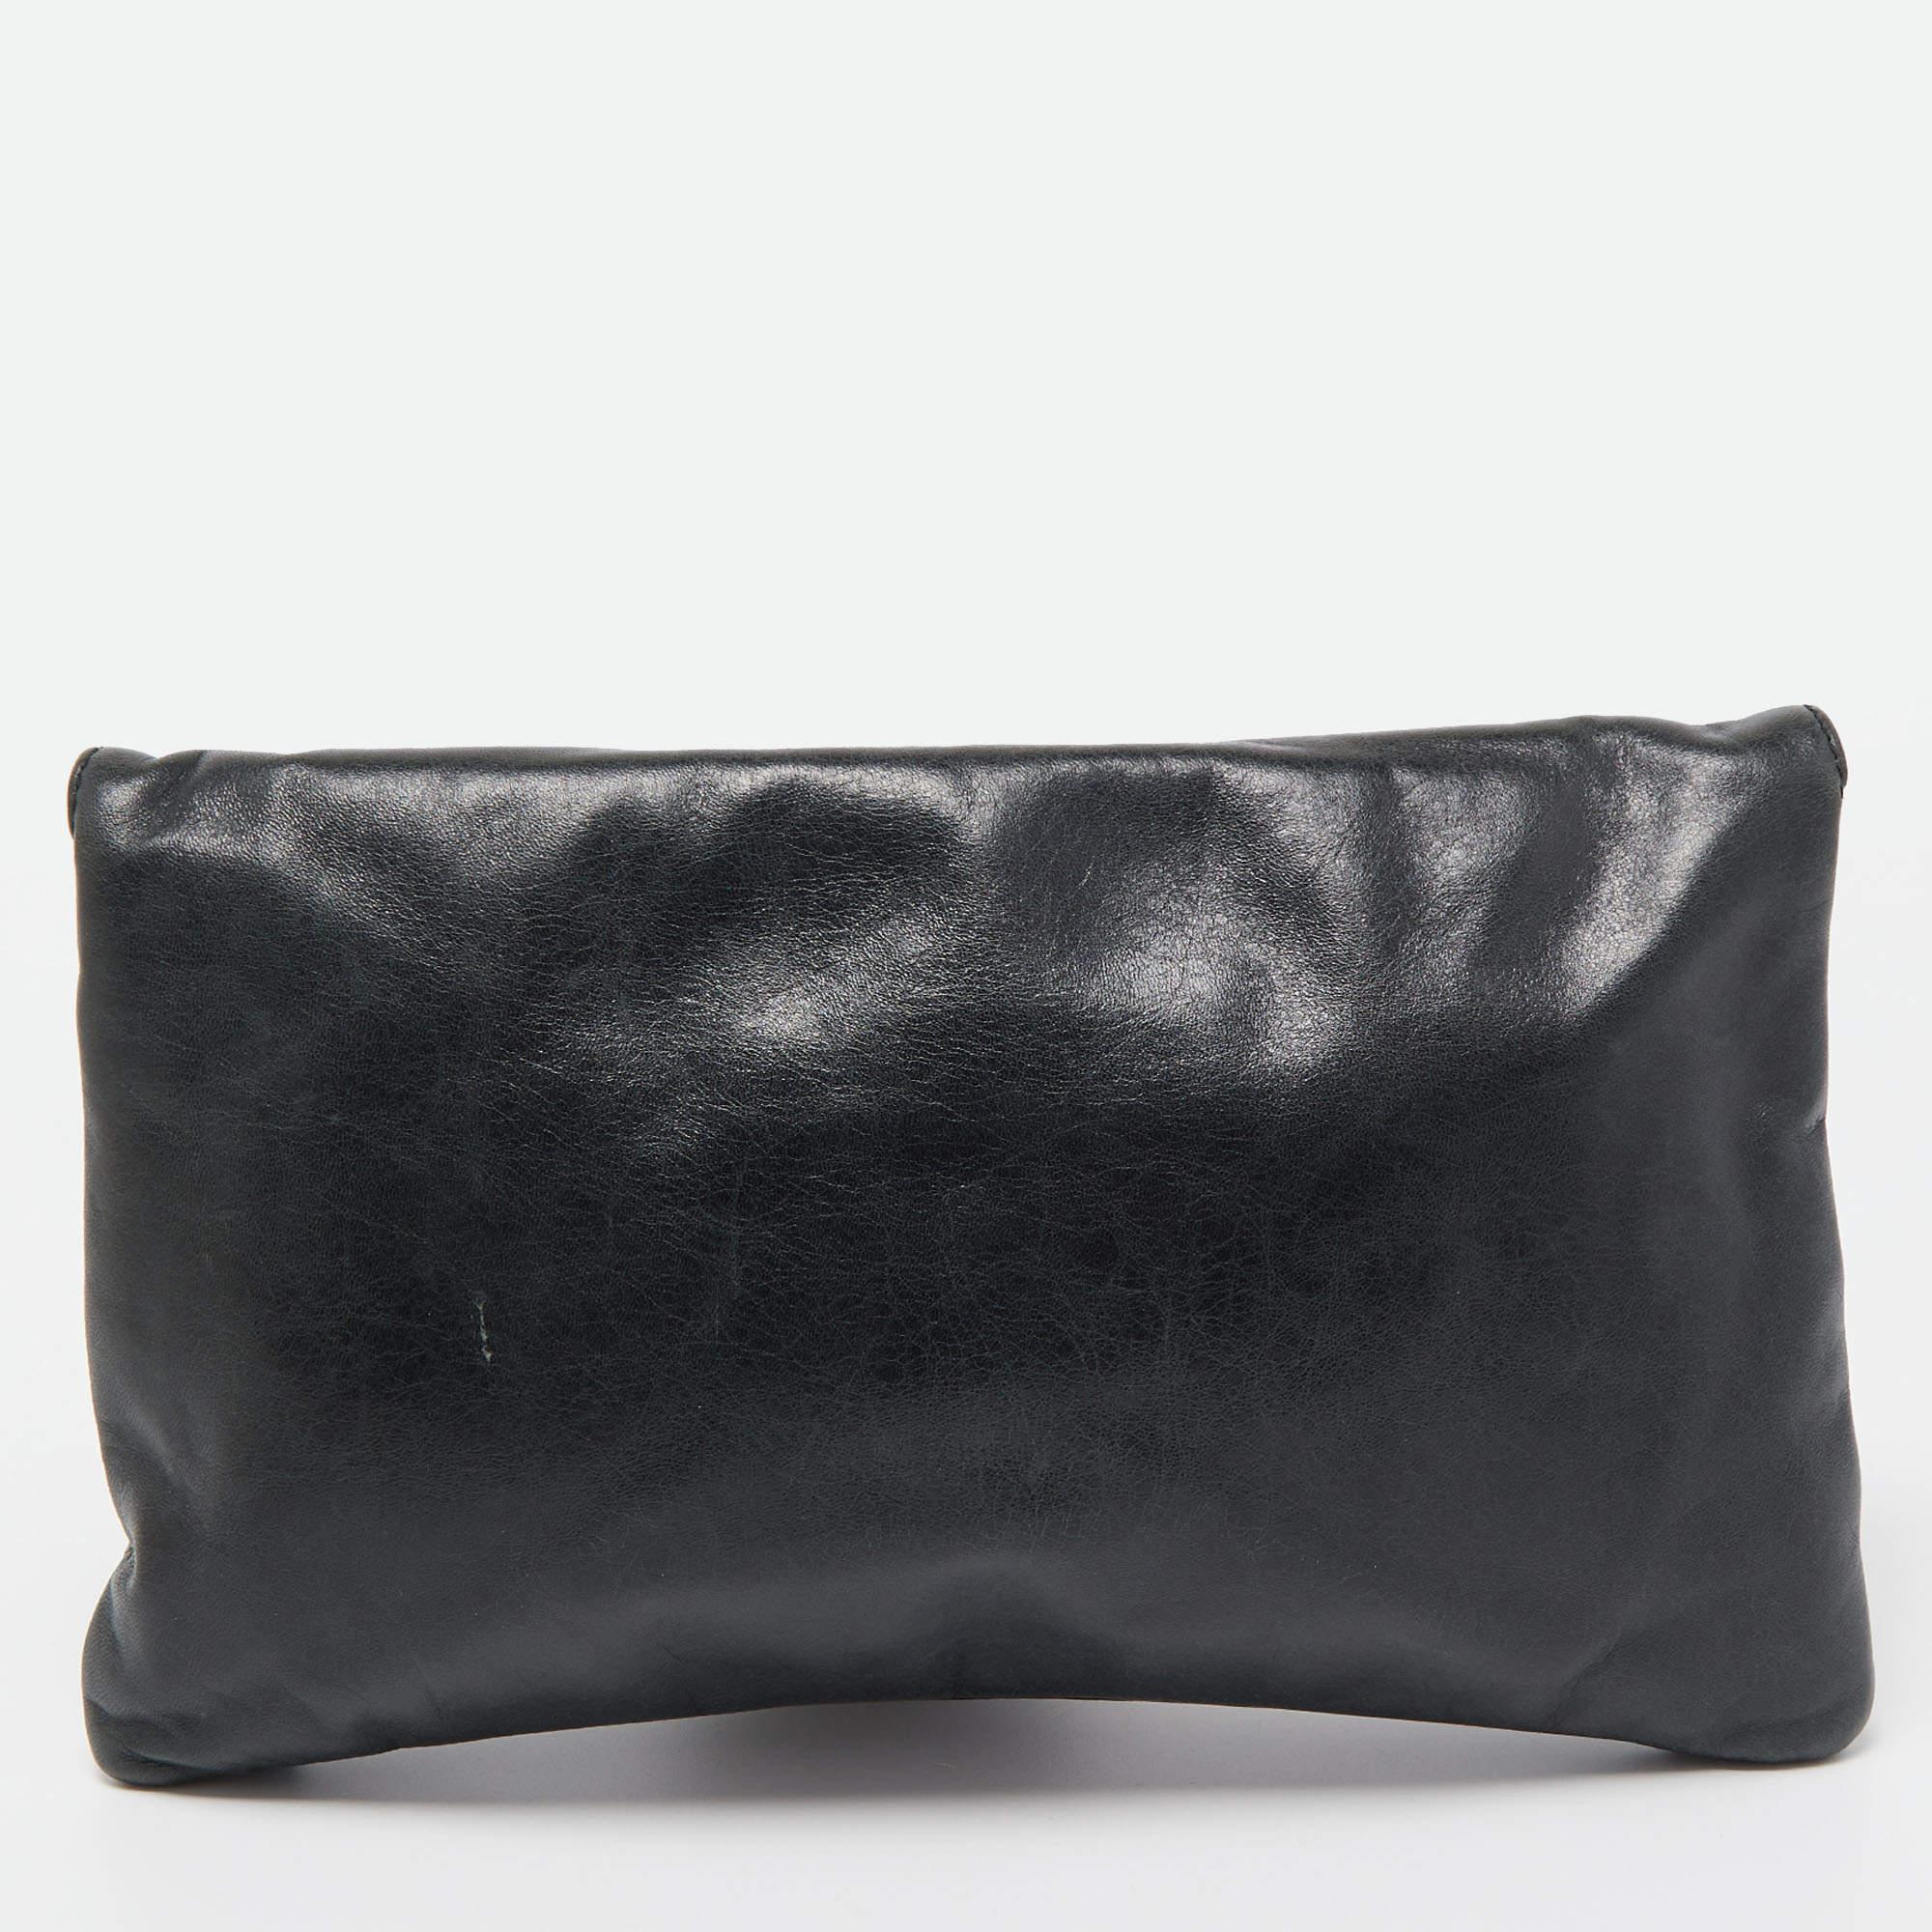 You will find yourself reaching out to this Balenciaga clutch more often because of its versatility. Crafted from leather, the folded top elevates its silhouette, and the gold-tone accents make it undeniably chic. The design is made functional with